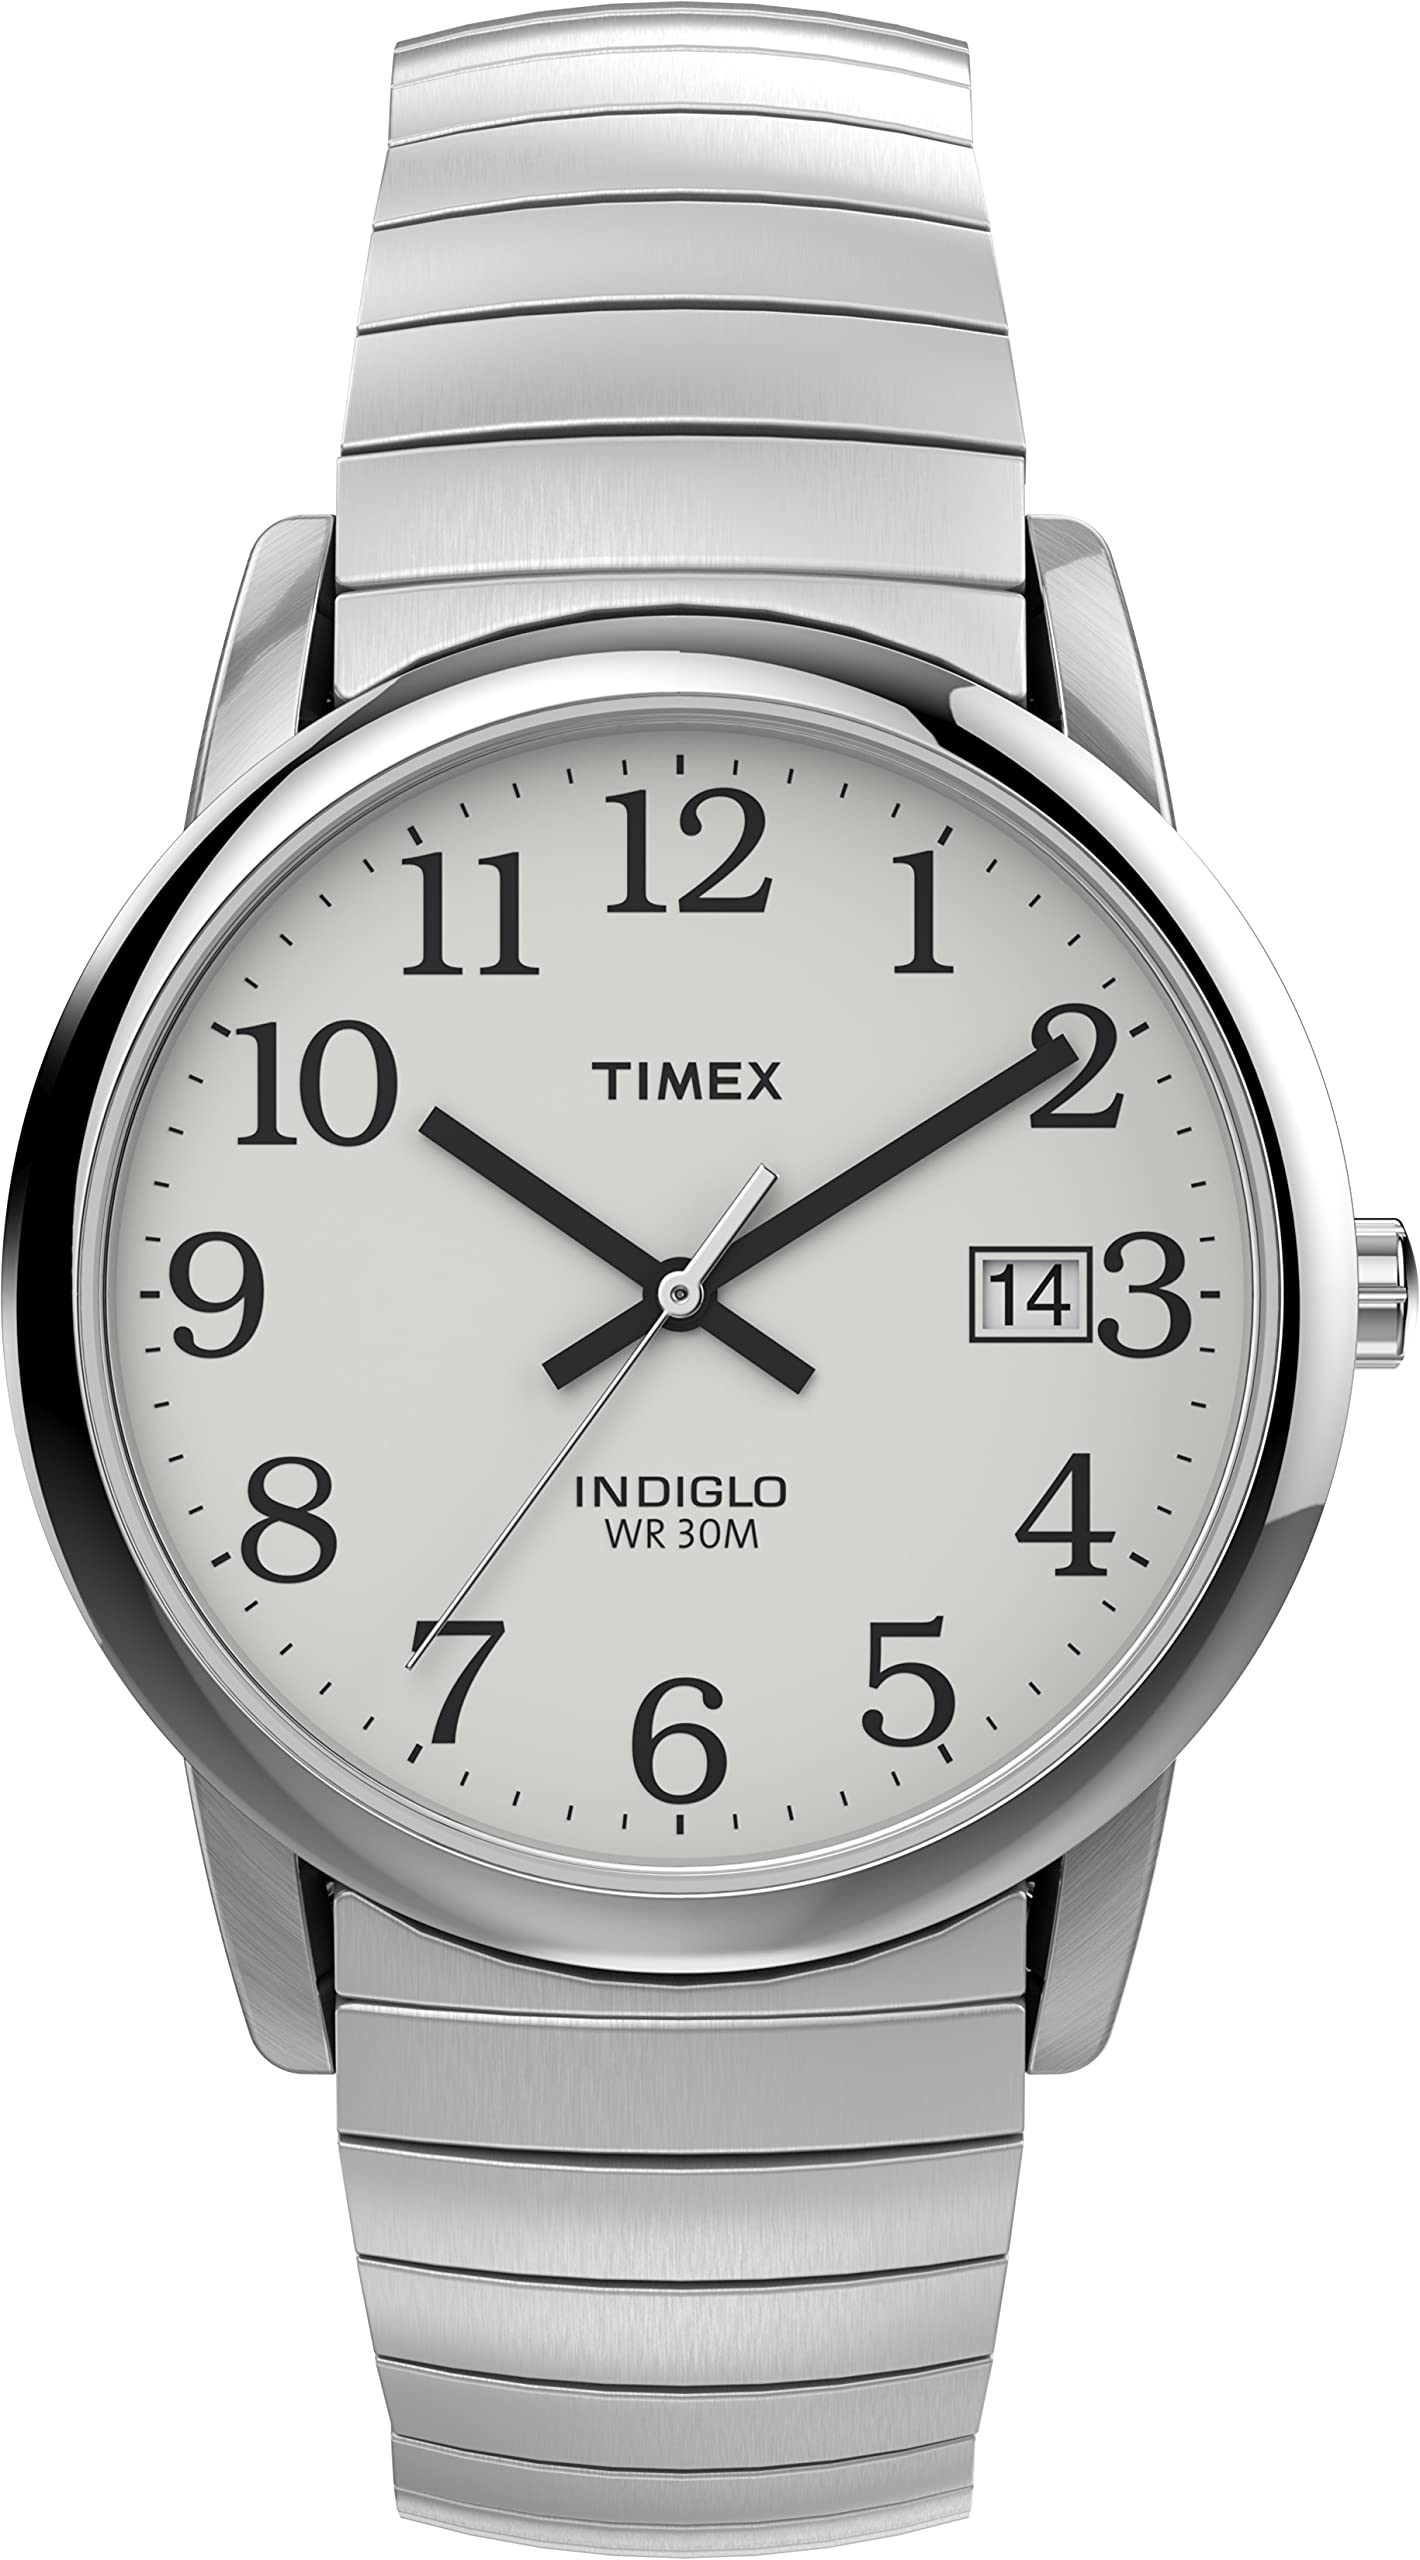 Timex Men's Easy Reader 35 mm Expansion Band Watch